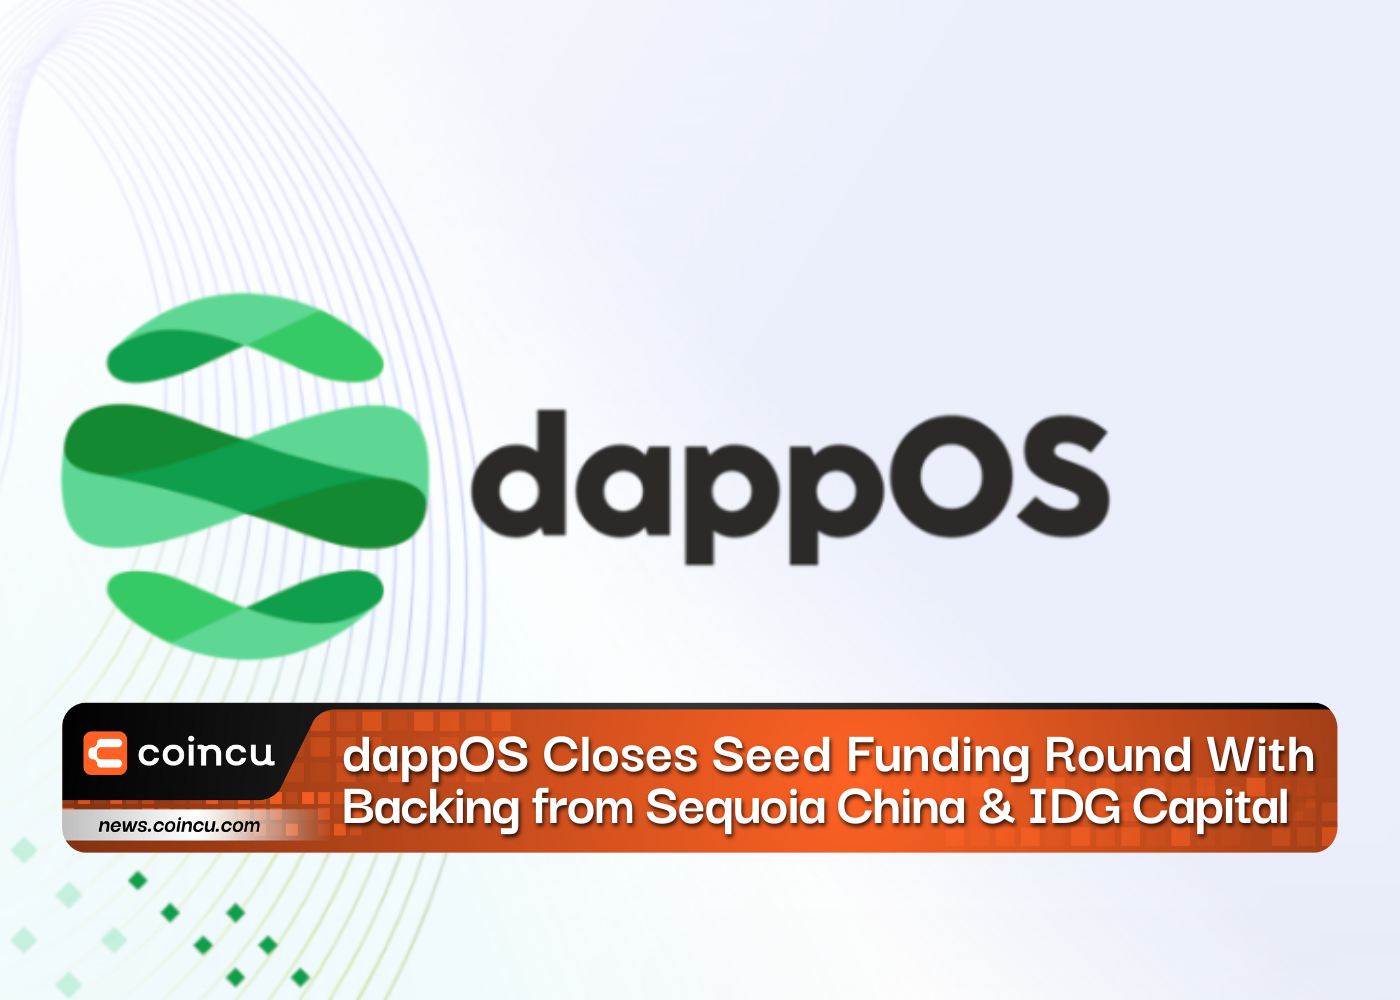 dappOS Closes Seed Funding Round With Backing from Sequoia China & IDG Capital